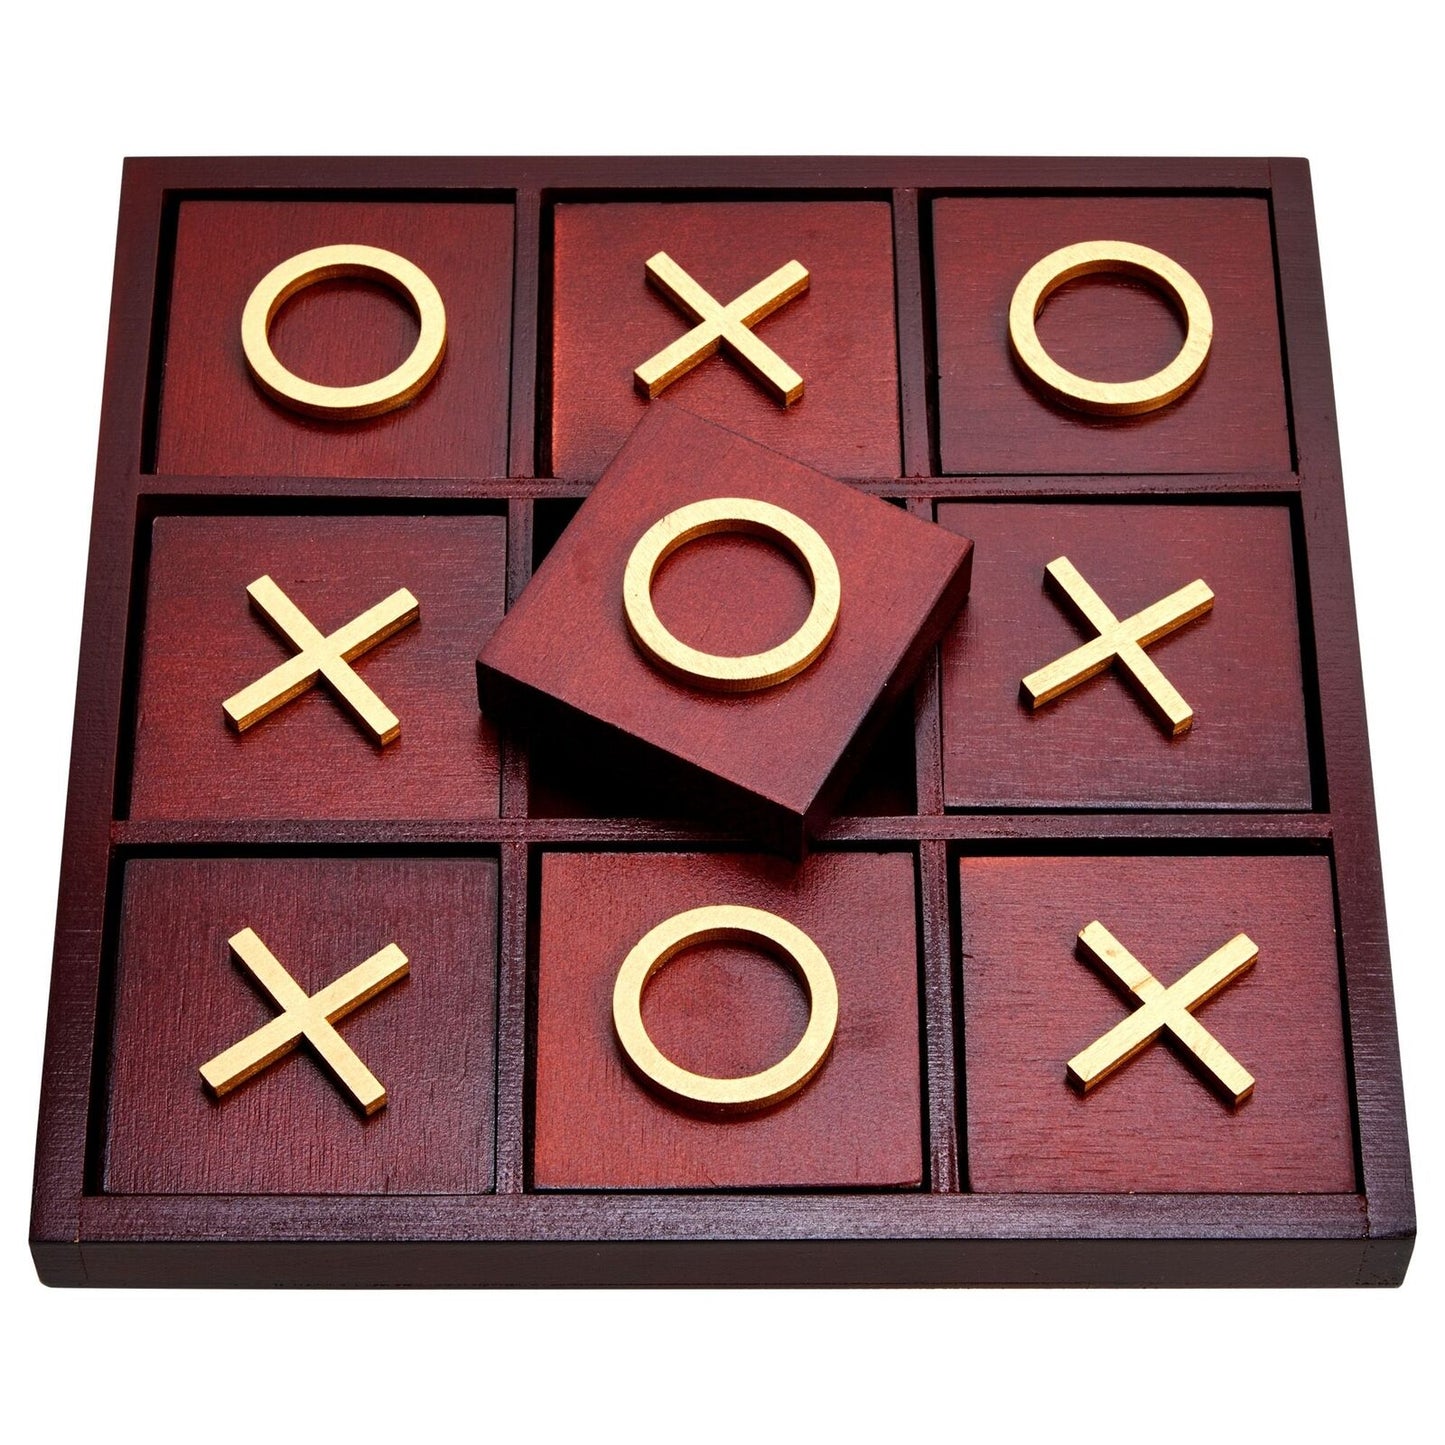 Tic Tac Toe Board Game for Kids Family Party Living Room Table Decor, 9.5X9.5"